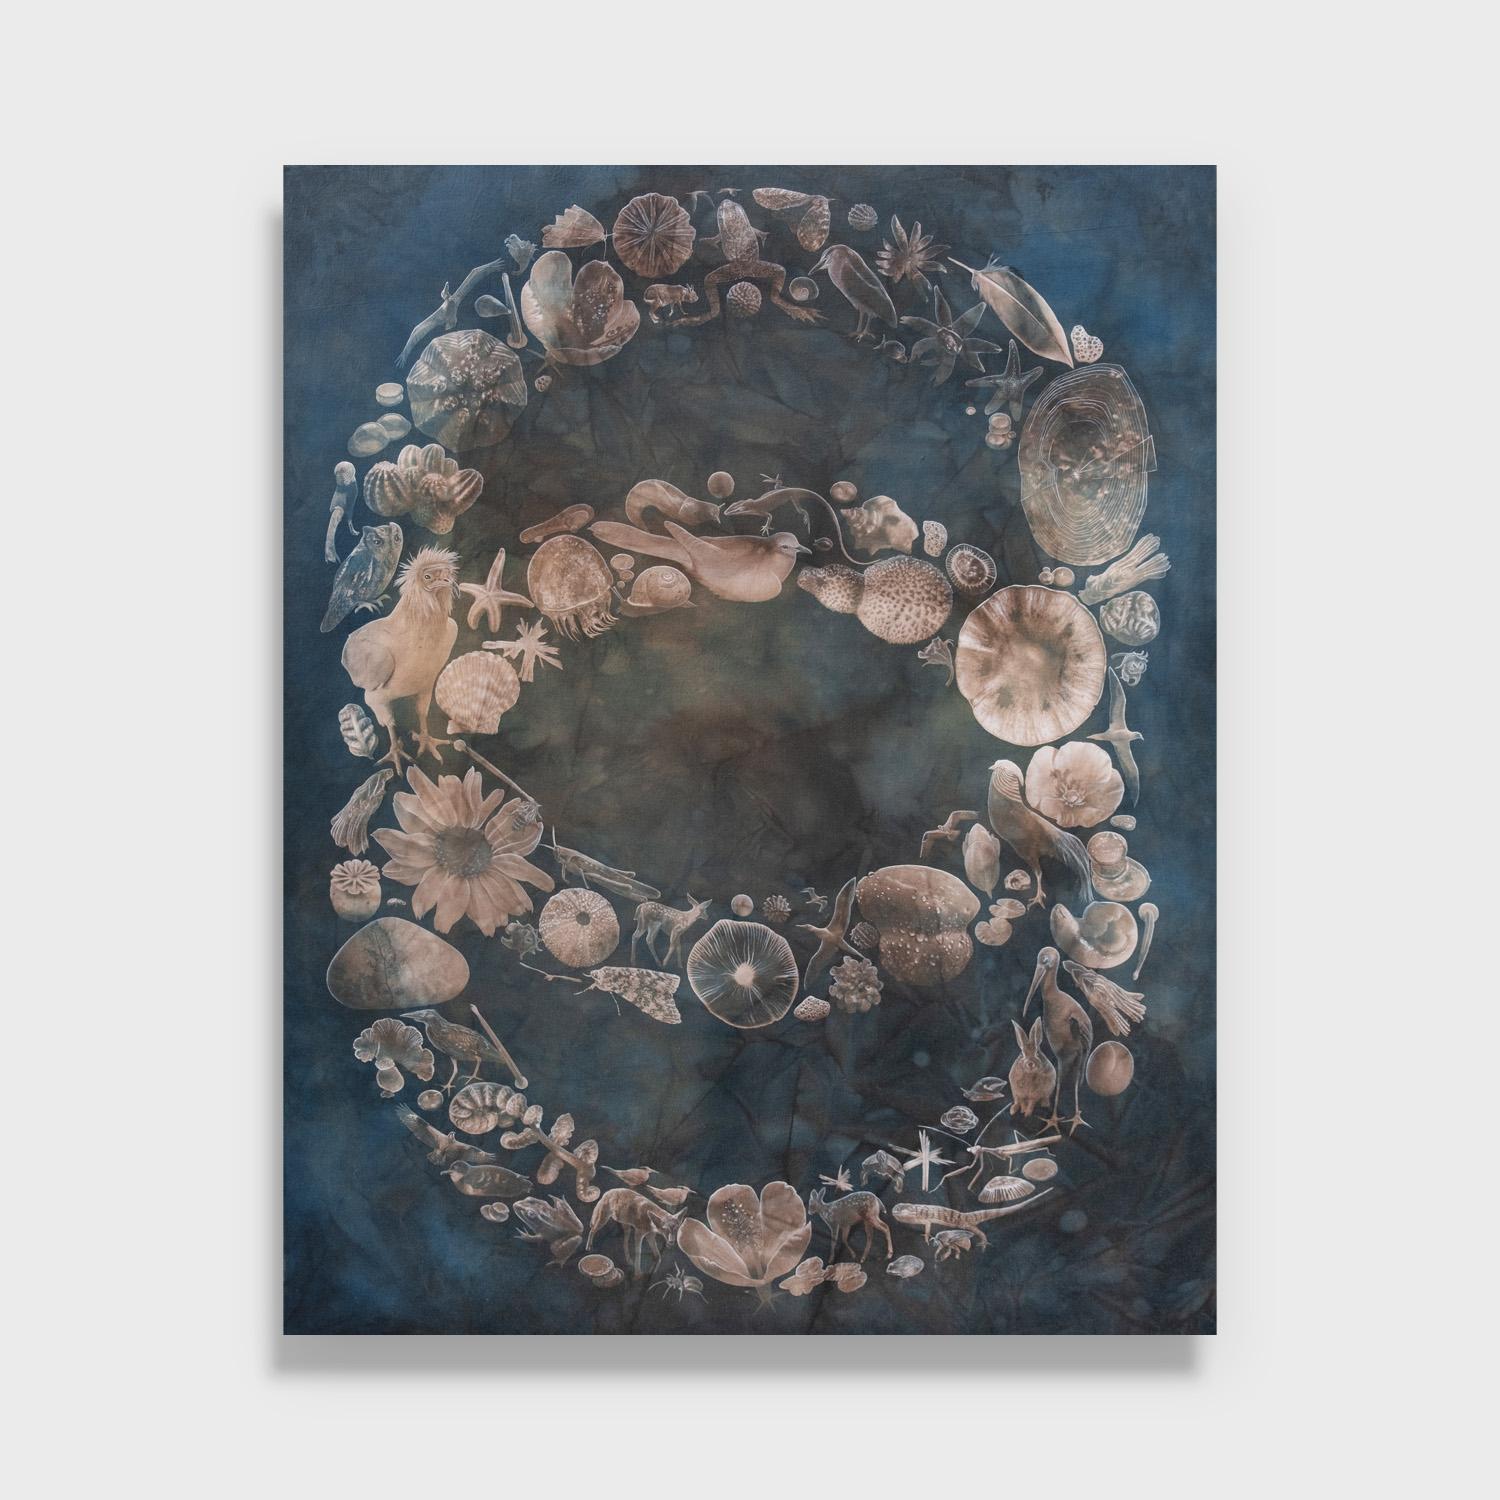 Annalise Neil Abstract Photograph - A Watercolor and Toned Cyanotype Photographic Print, "Harmony"